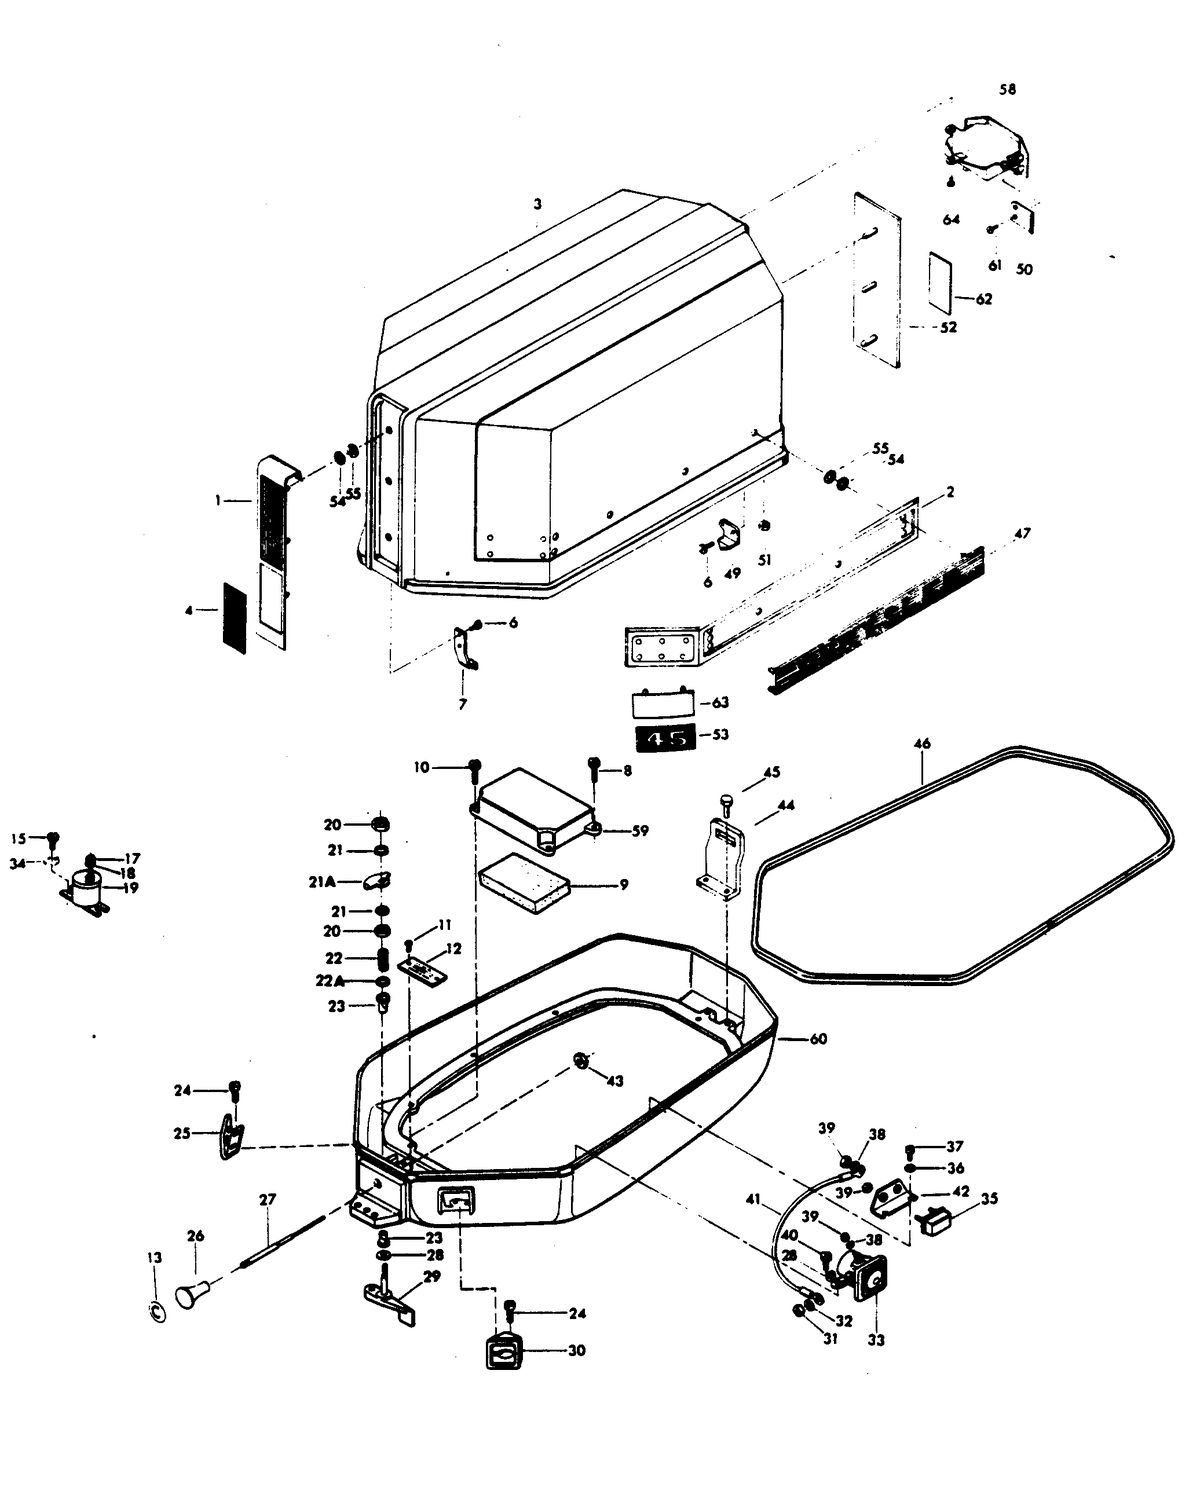 CHRYSLER 45 H.P. ENGINE COVER AND SUPPORT PLATE